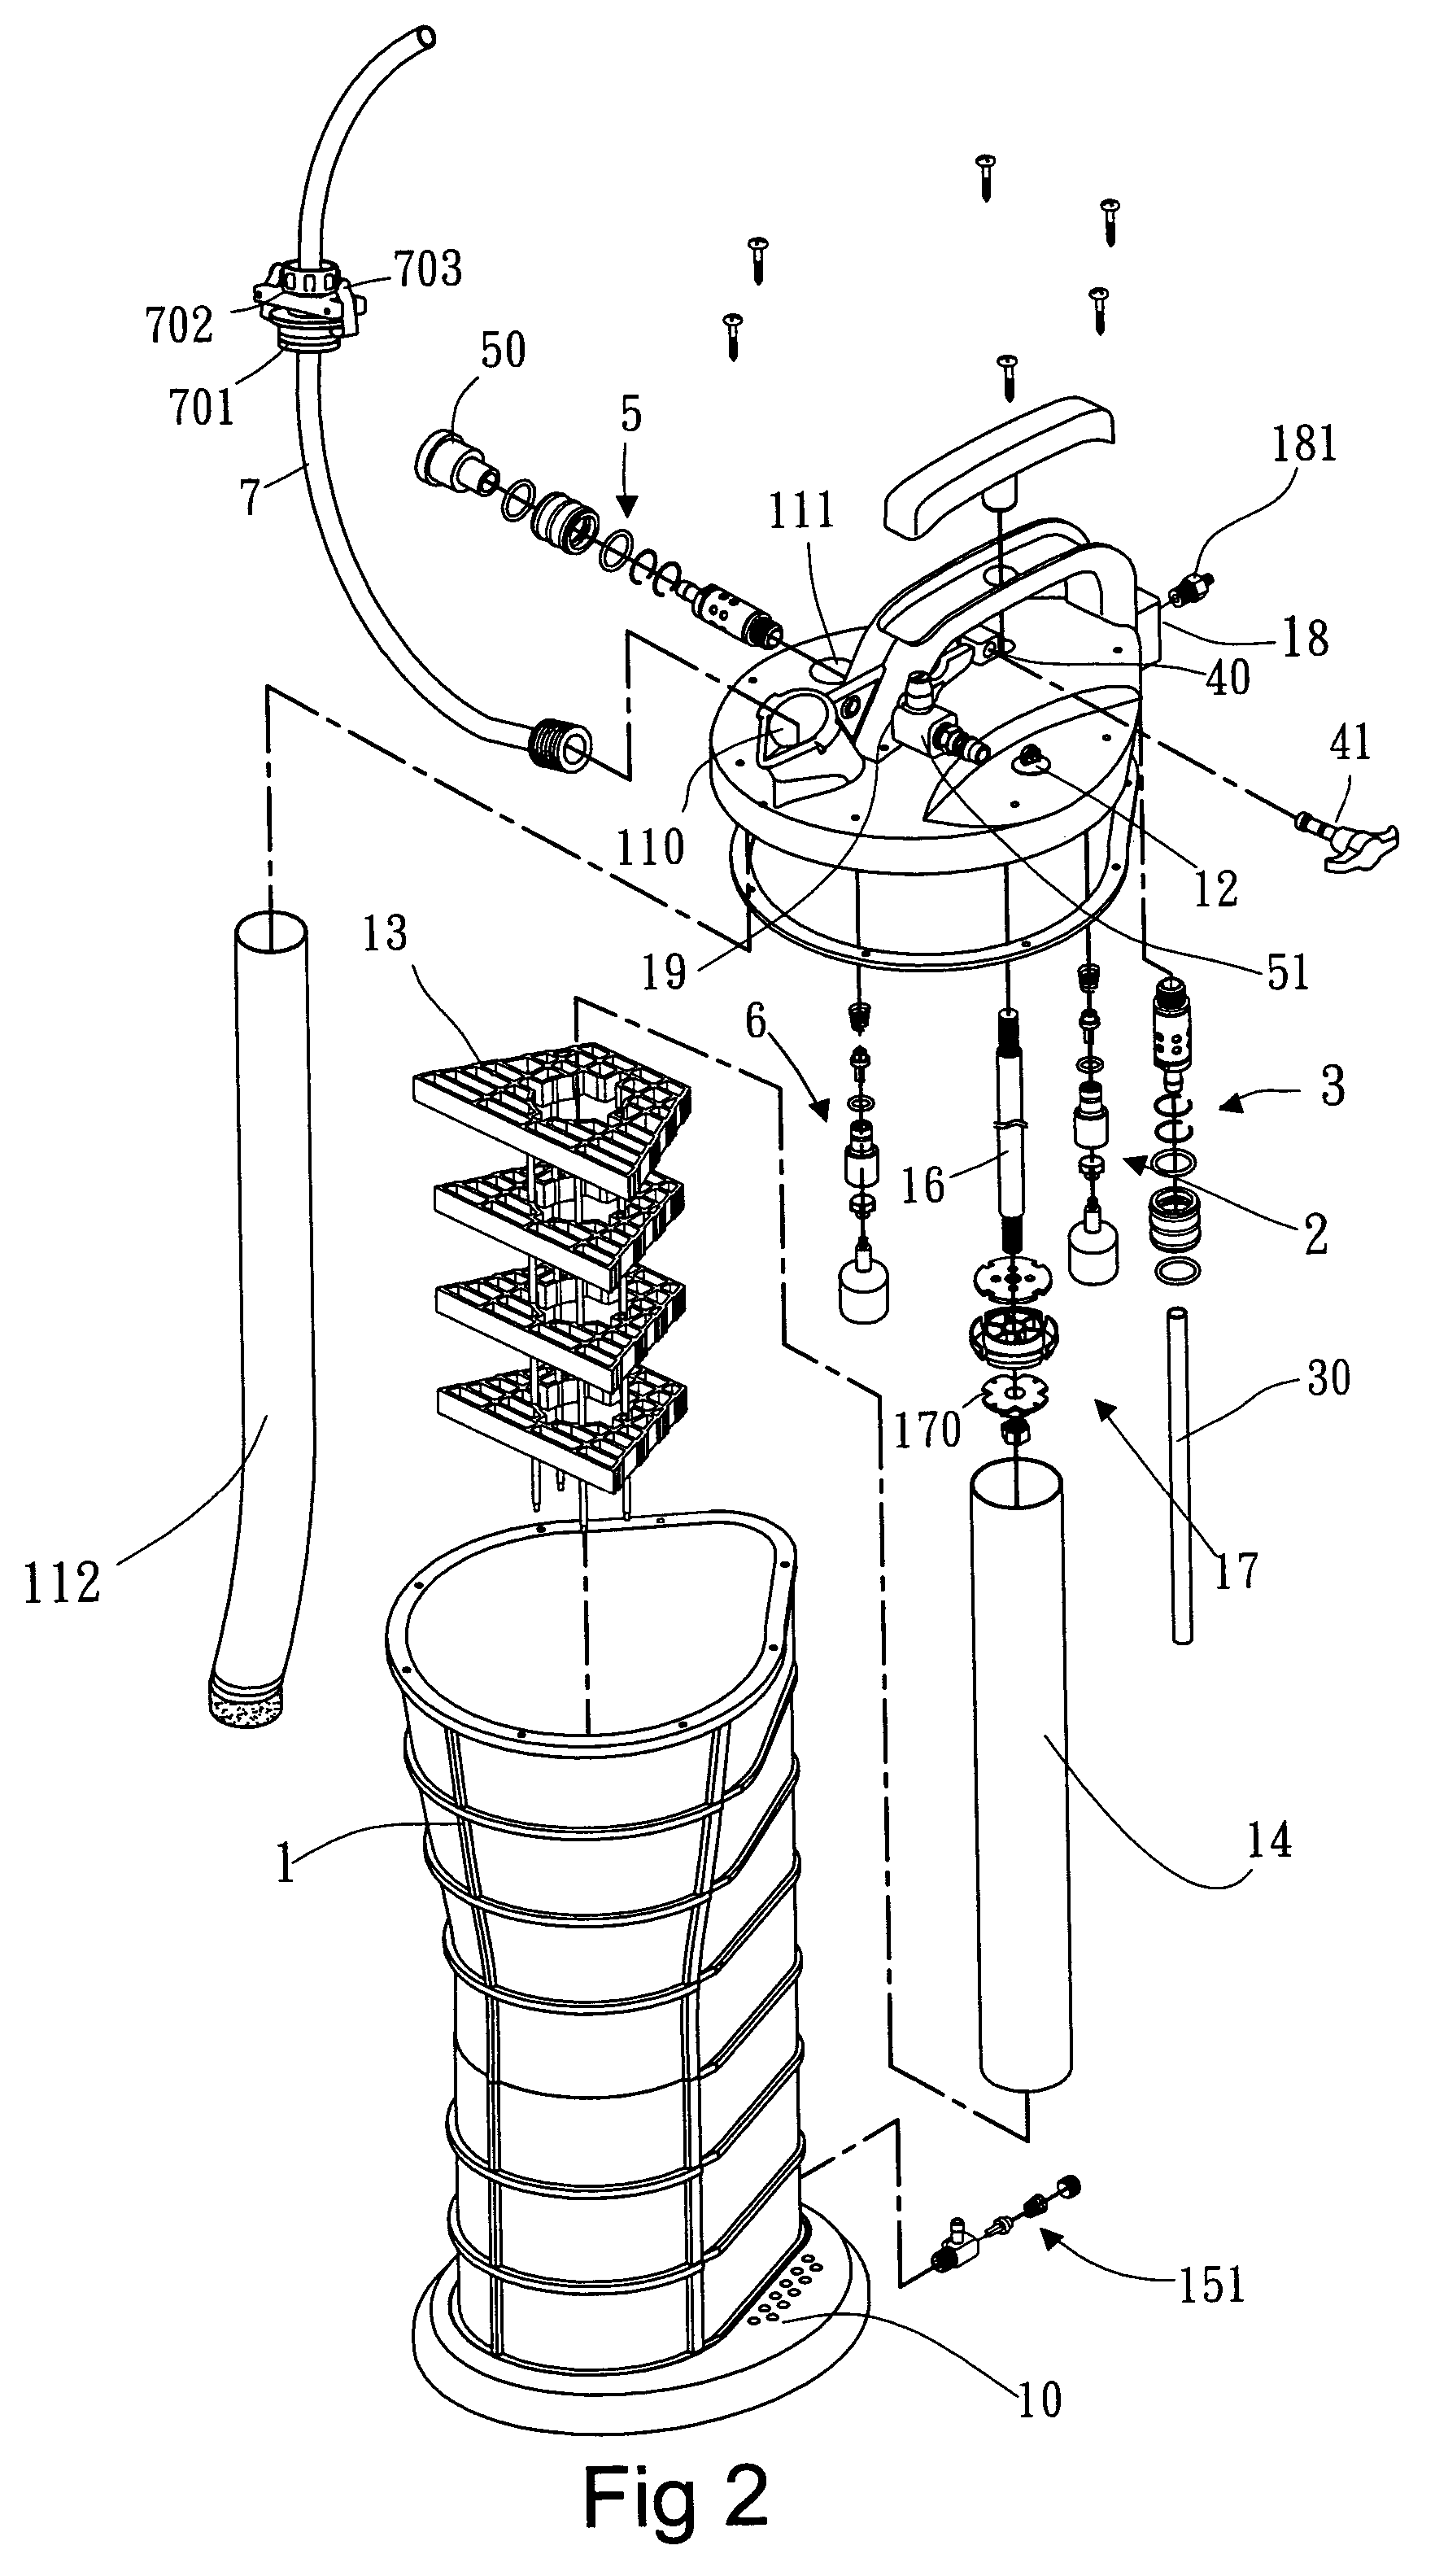 Pumping device